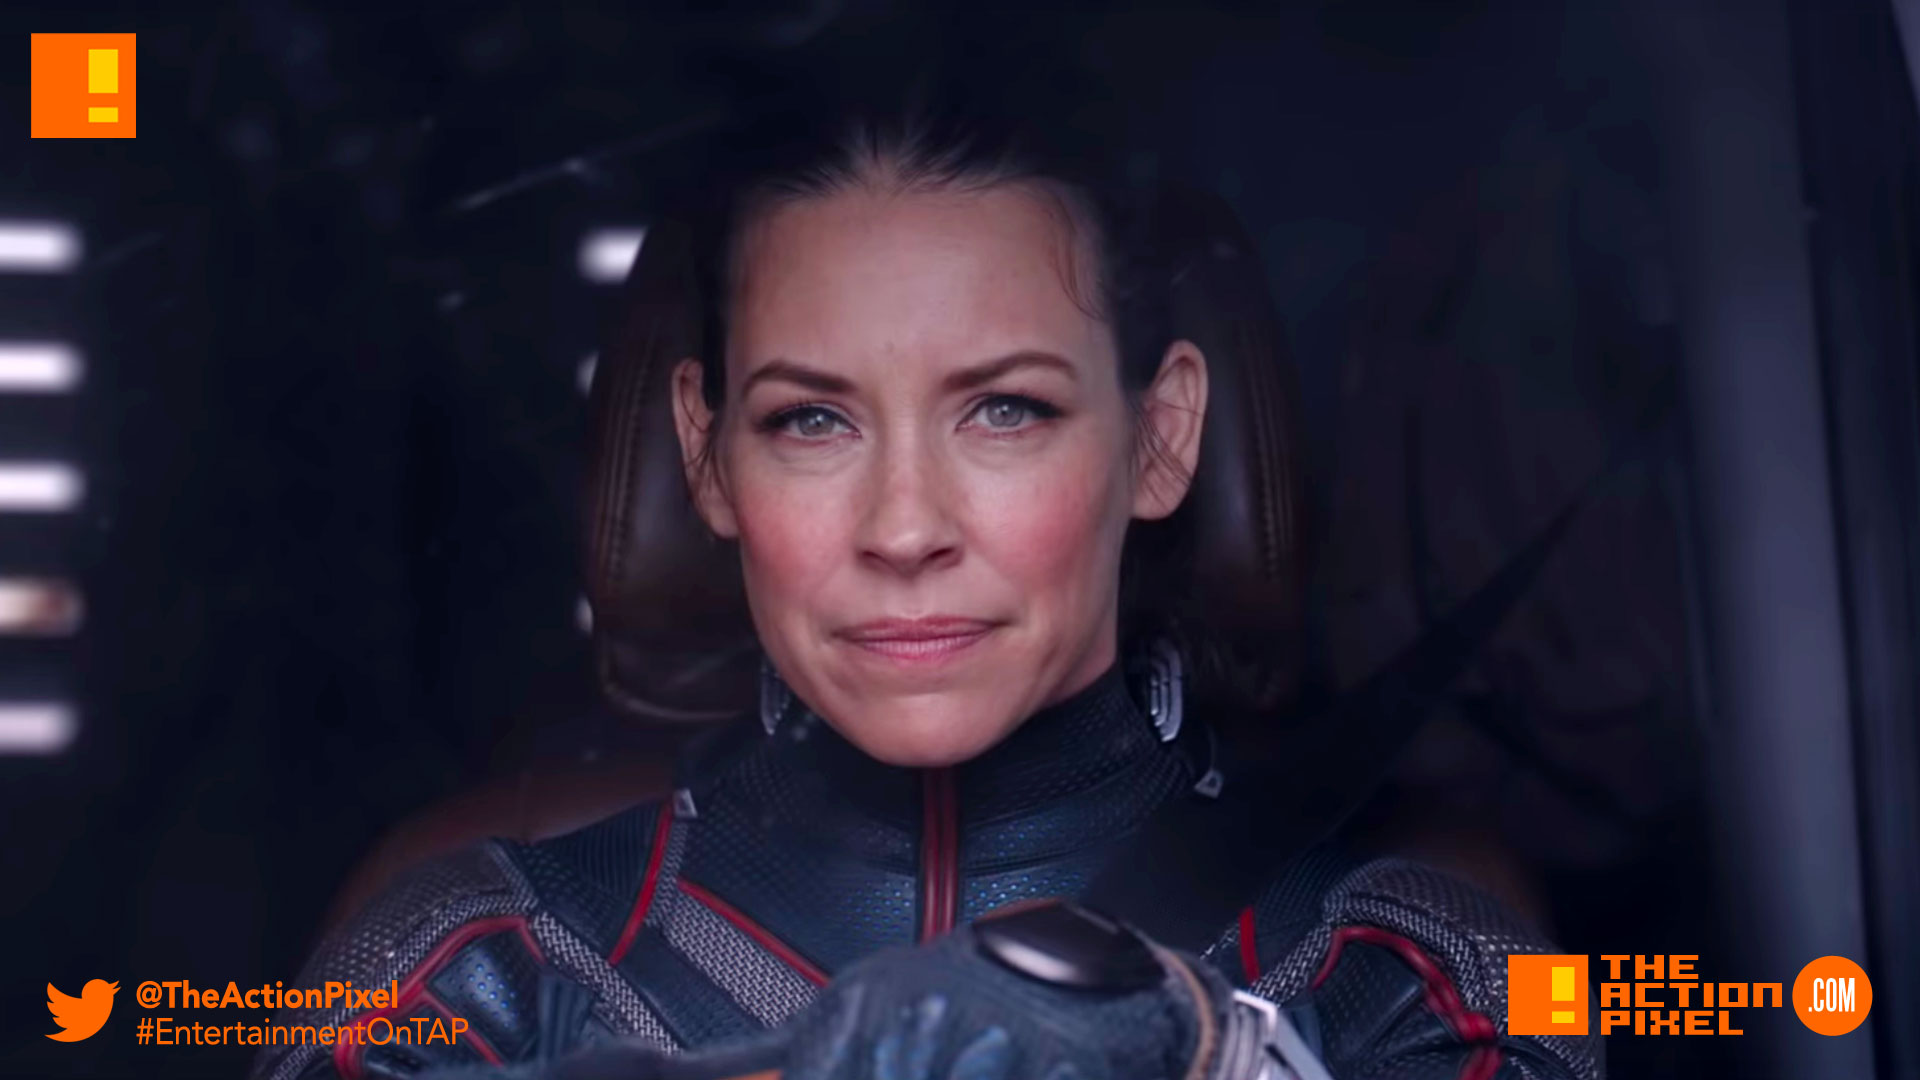 ant-man and the wasp, antman and the wasp, ant-man & the wasp, marvel, marvel studios, marvel comics, entertainment on tap,the action pixel, entertainment on tap,evangeline lilly, paul rudd, hannah john-kamen,laurence fishburne,michelle pfeiffer, michael douglas,fandango, clip, scenic tour,